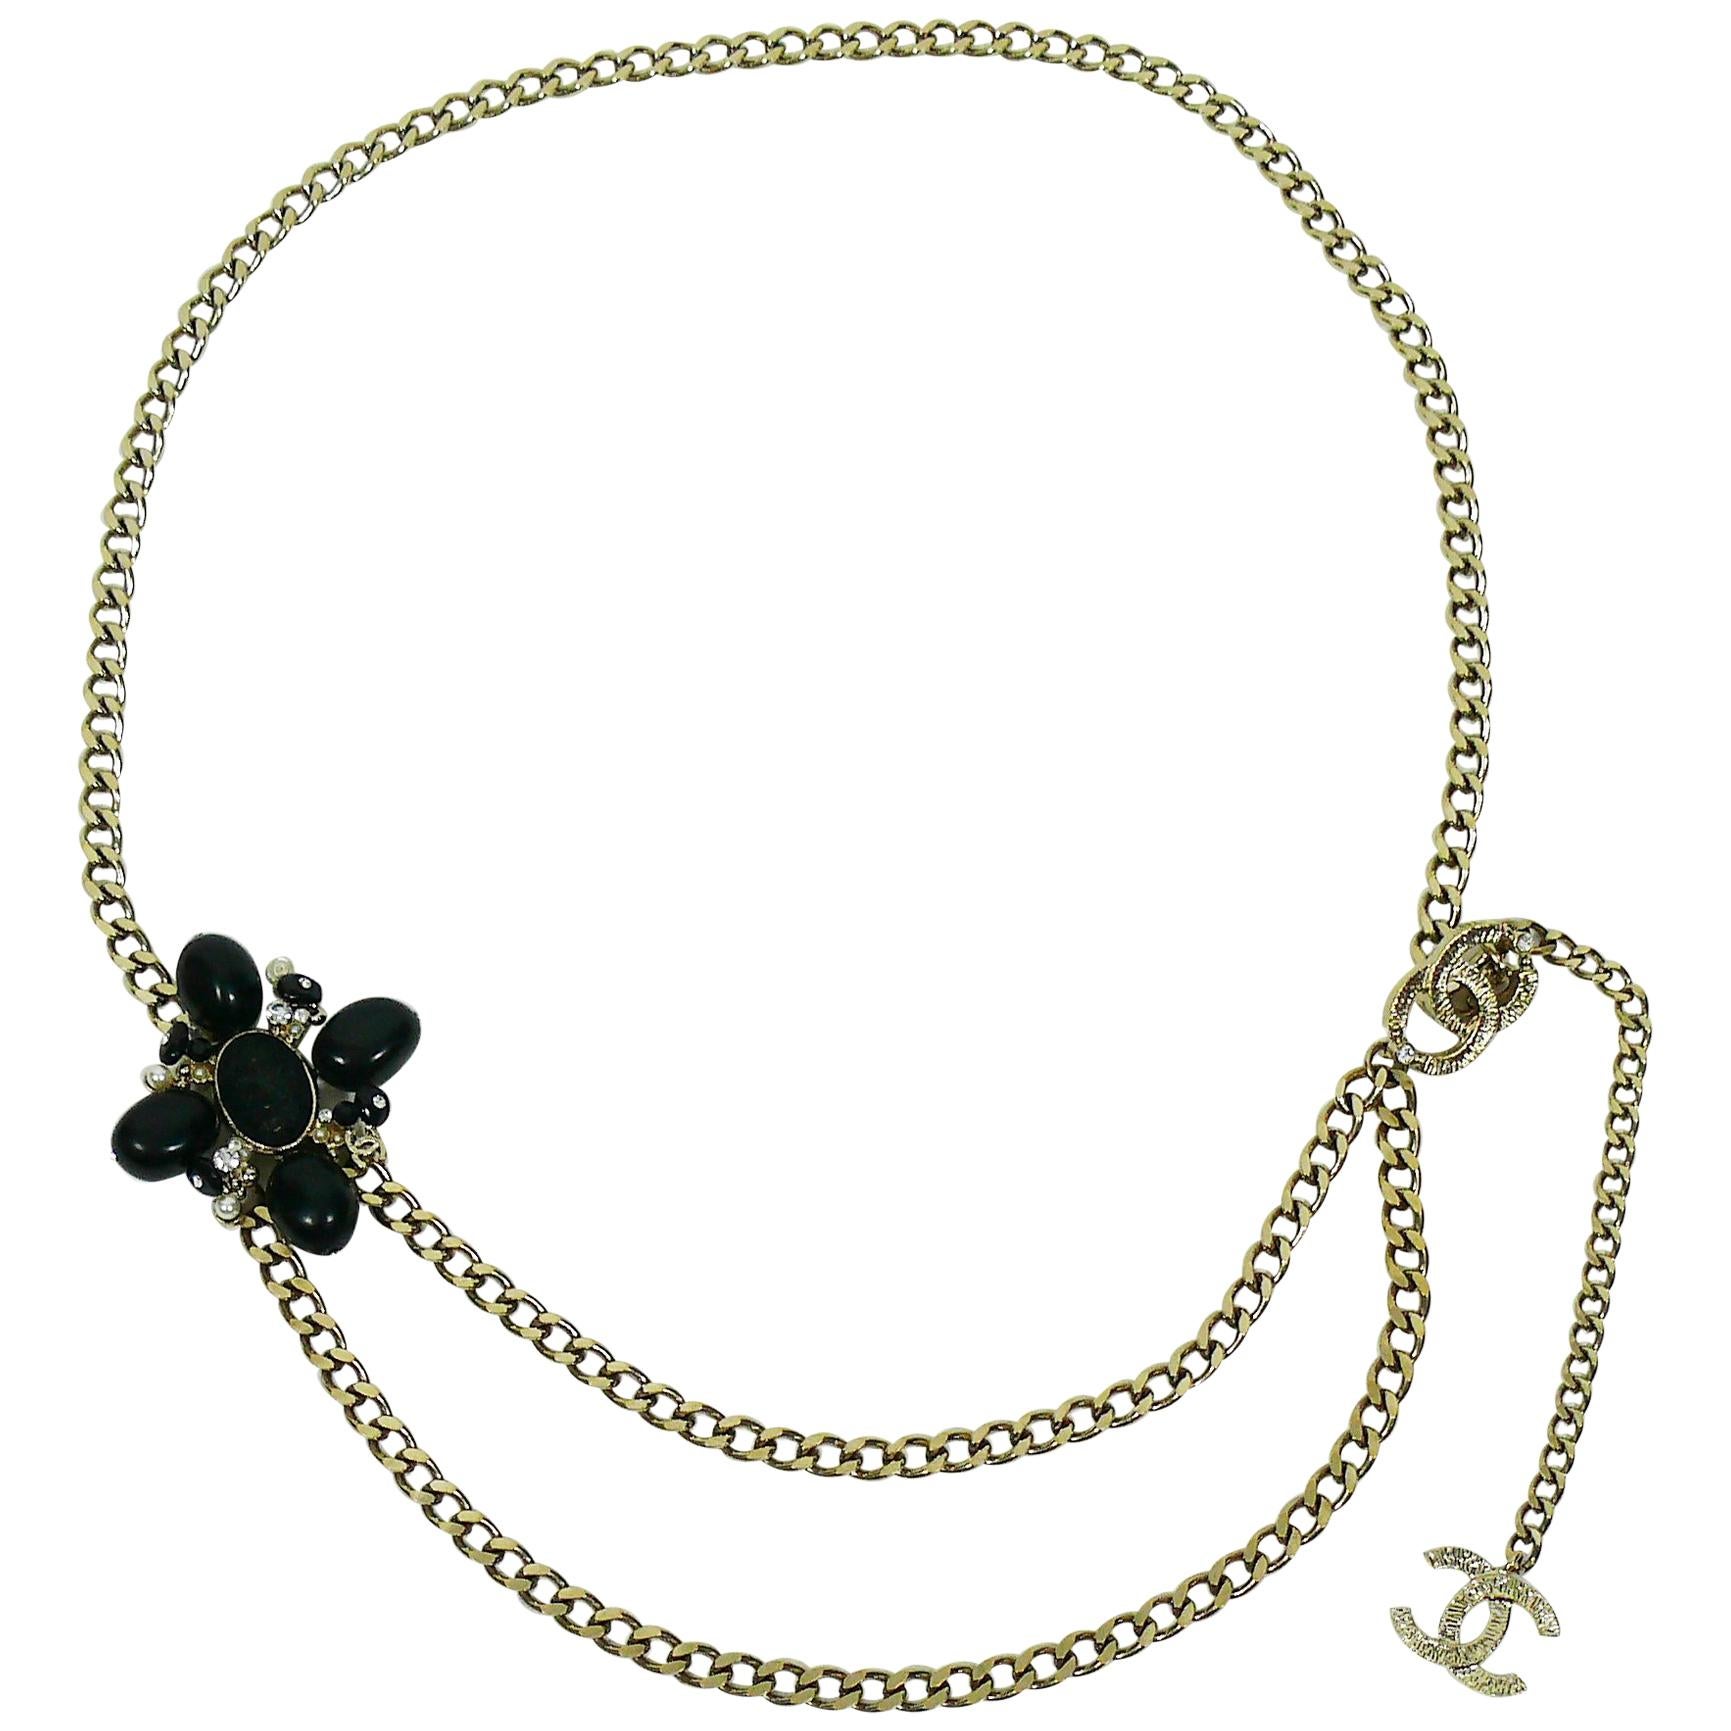 Chanel 2005 Clover and CC Chain Link Belt Necklace